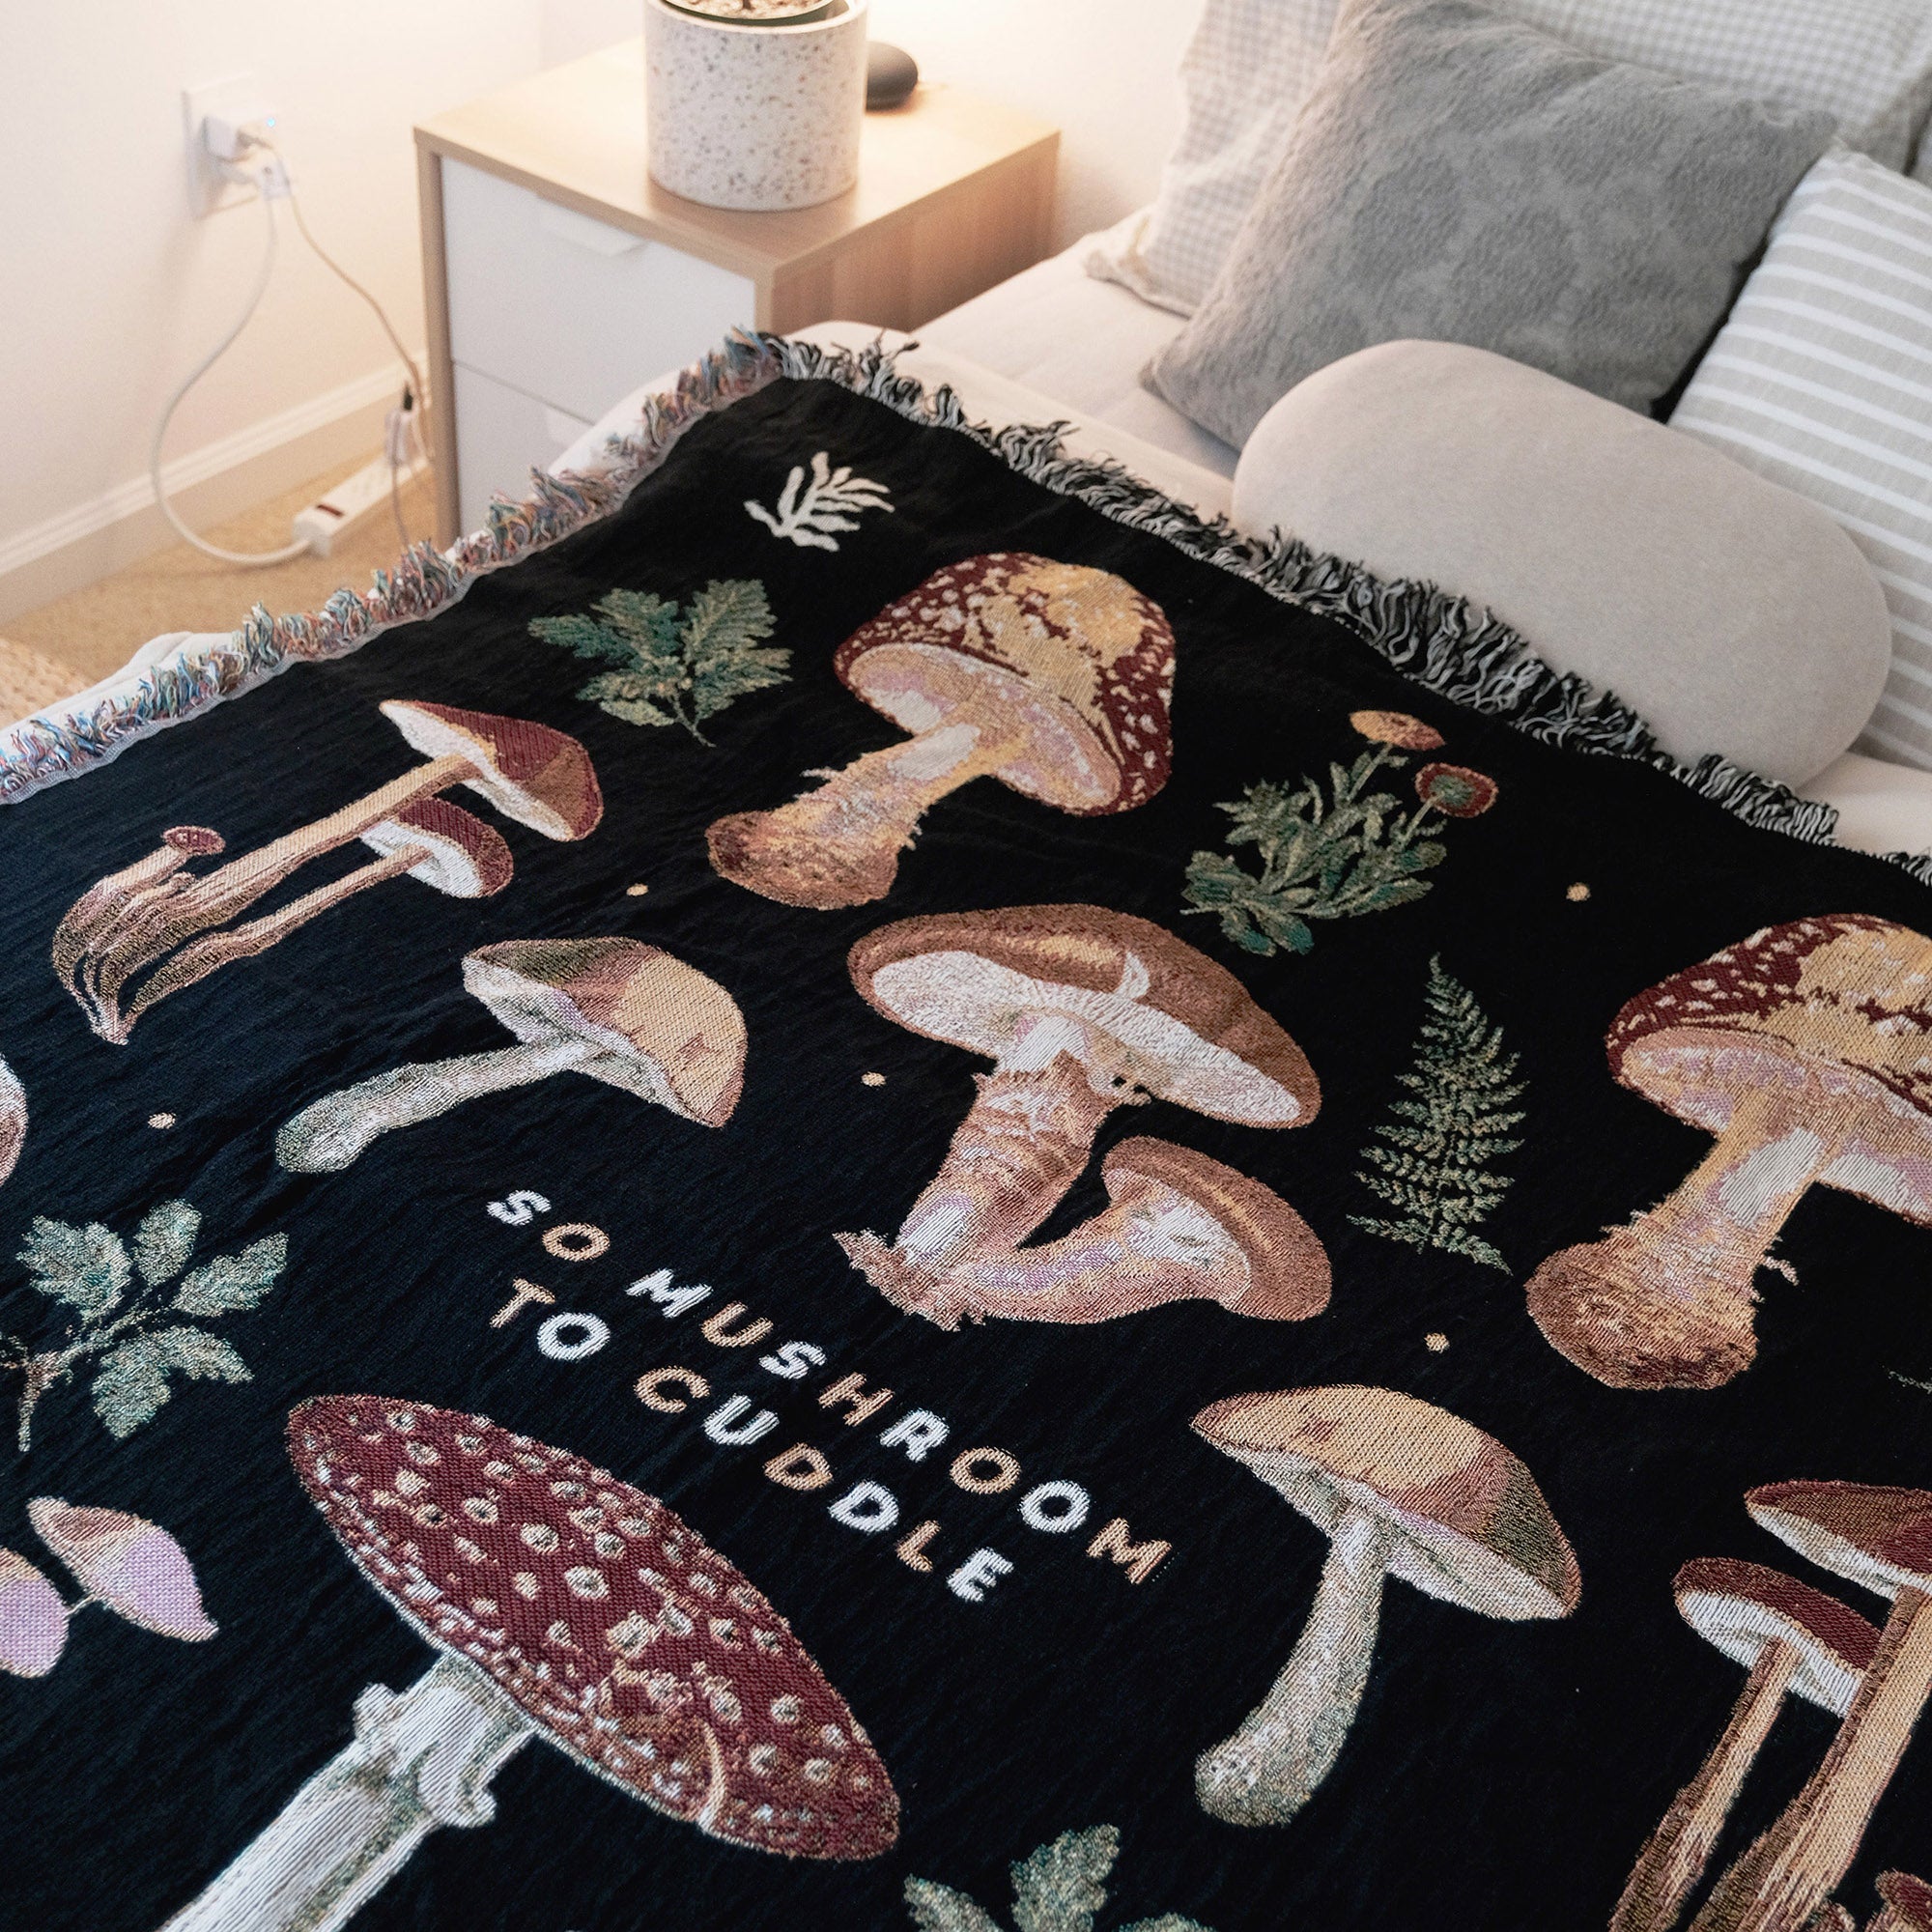 So Mushroom To Cuddle Woven Blanket - Woven - Personalized Gifts for Couples, Custom Birthday Gifts, Custom Anniversary Gifts | Relatable Basic